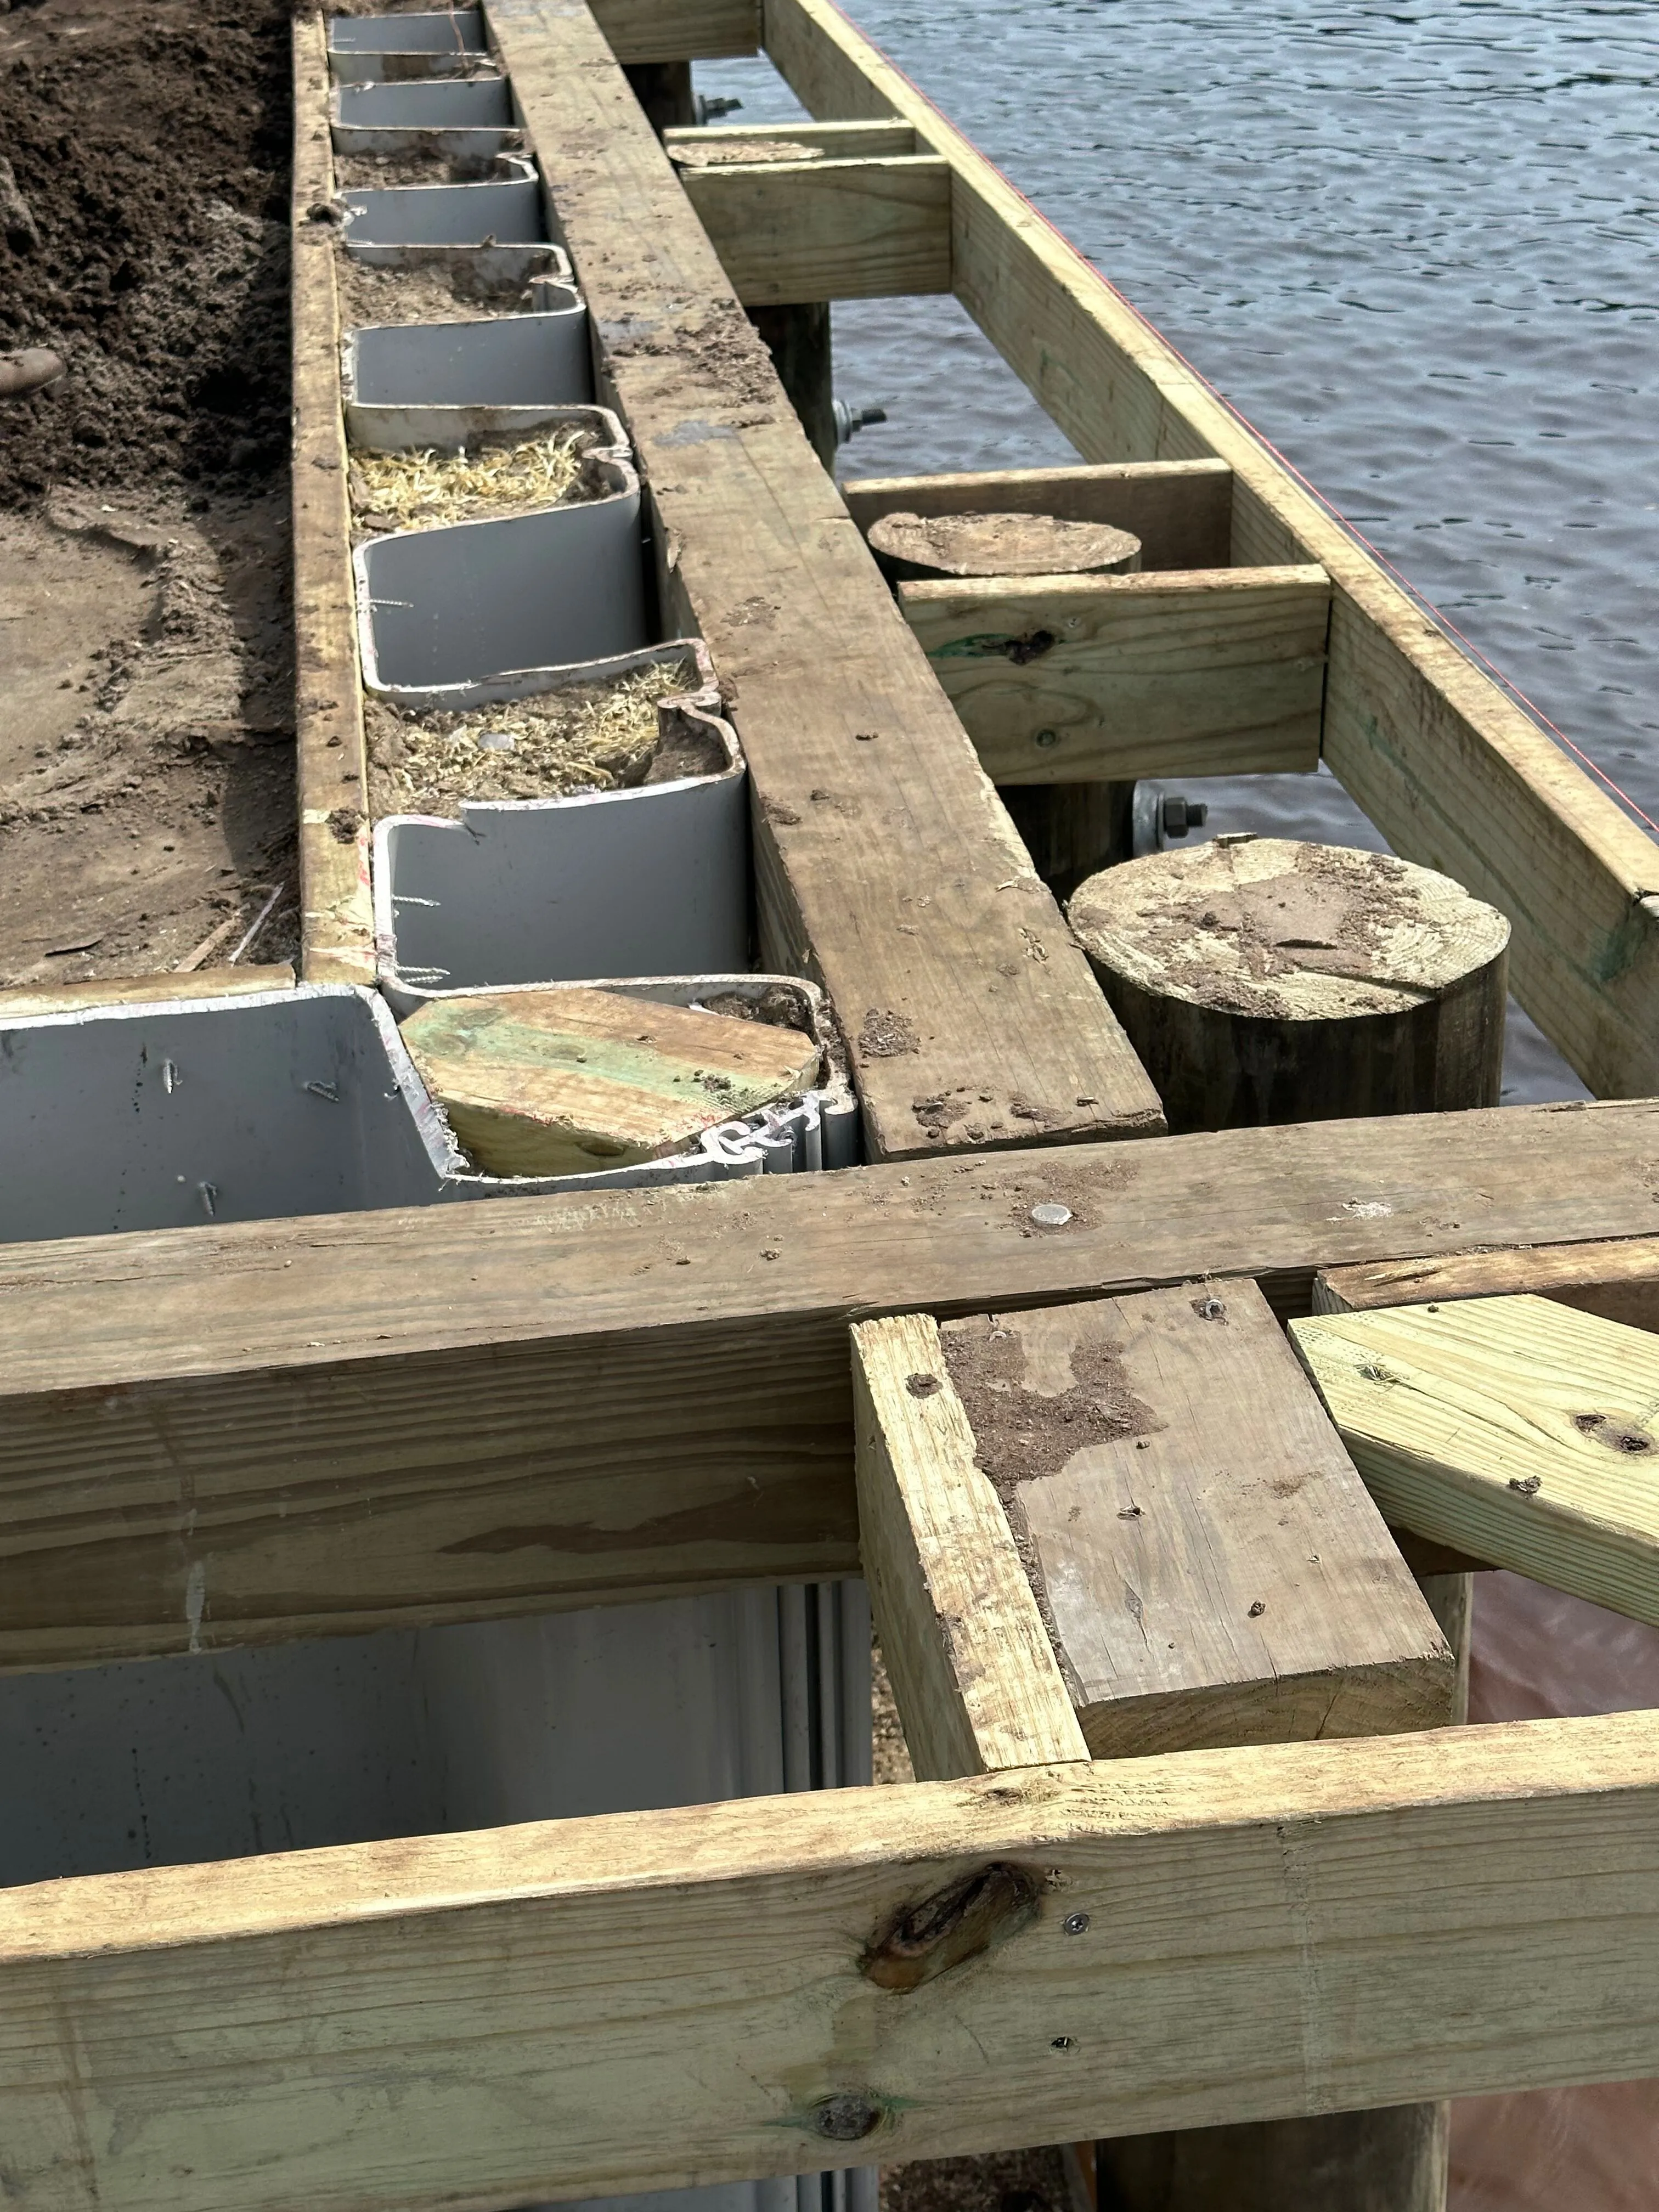 Super Strong Vinyl Bulkhead framed out for composite wood cap under construction in Myrtle Beach SC on the Intracoastal Waterway built by Waterbridge Contractors of the Carolinas